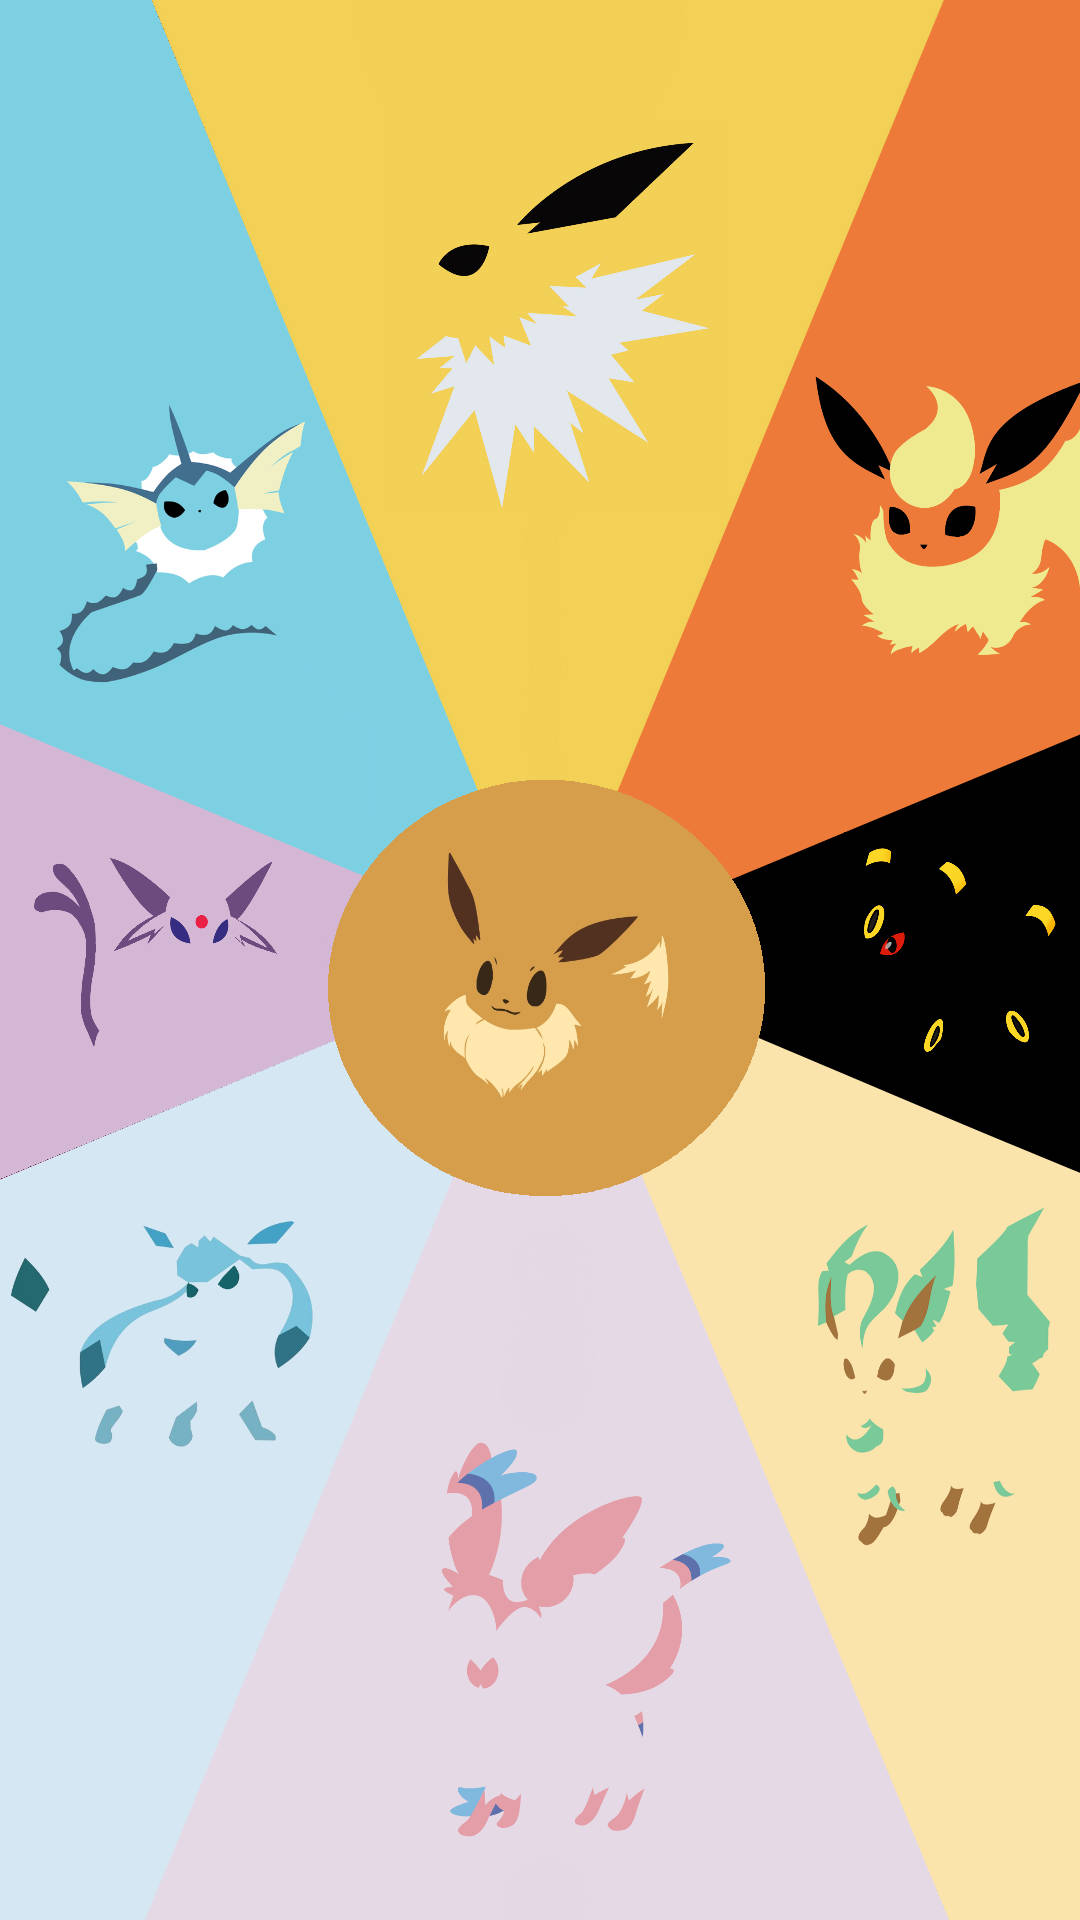 Shine bright like an Eevee with this amazing Eevee iPhone Wallpaper